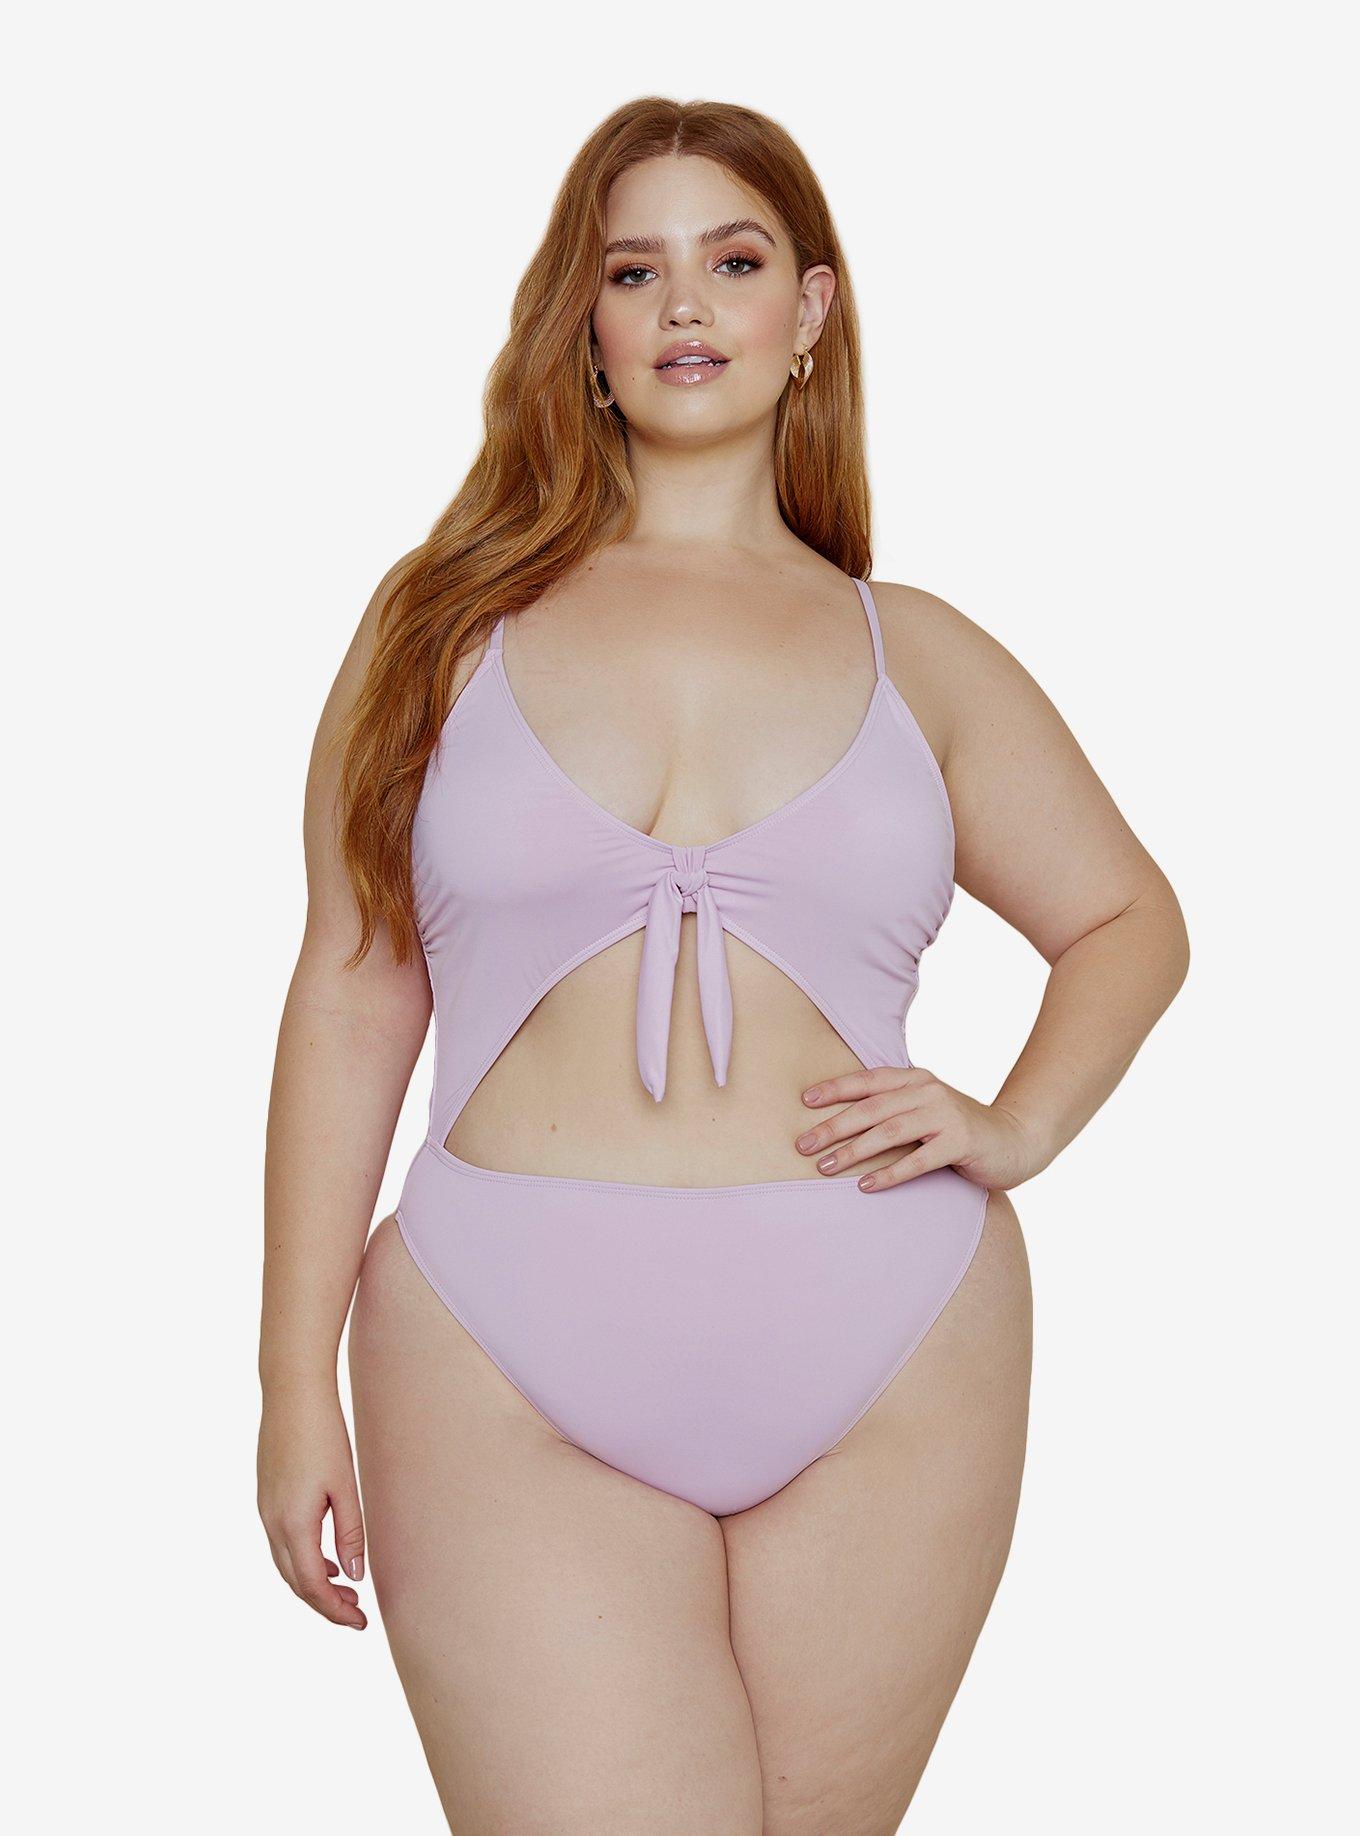 Dippin' Daisy's Glam Swimsuit Lilac Plus Size, PURPLE, hi-res